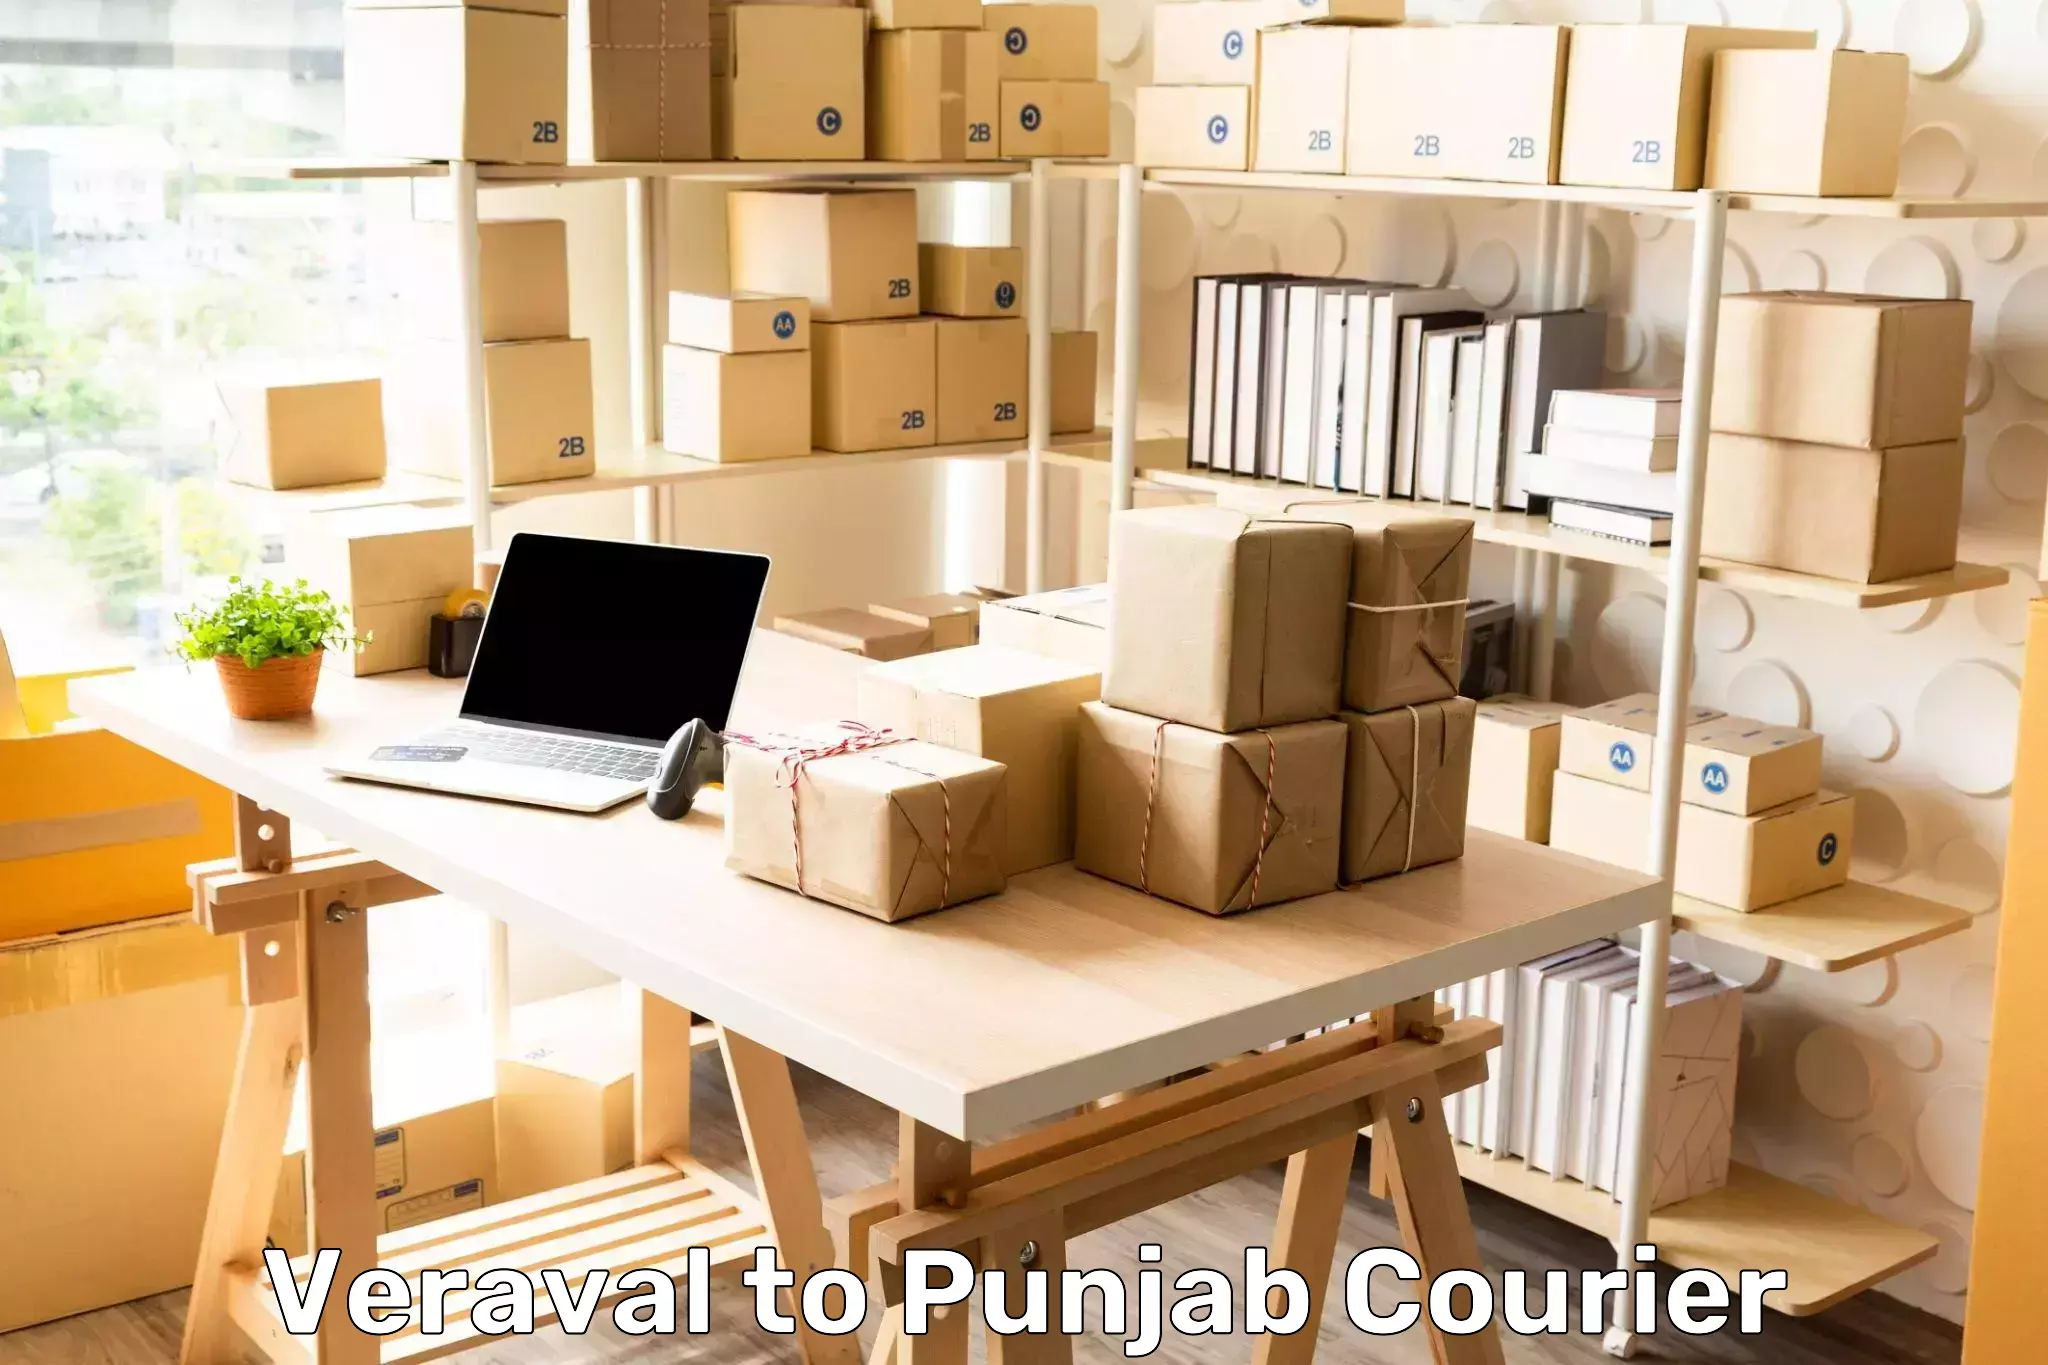 Next day courier Veraval to Goindwal Sahib